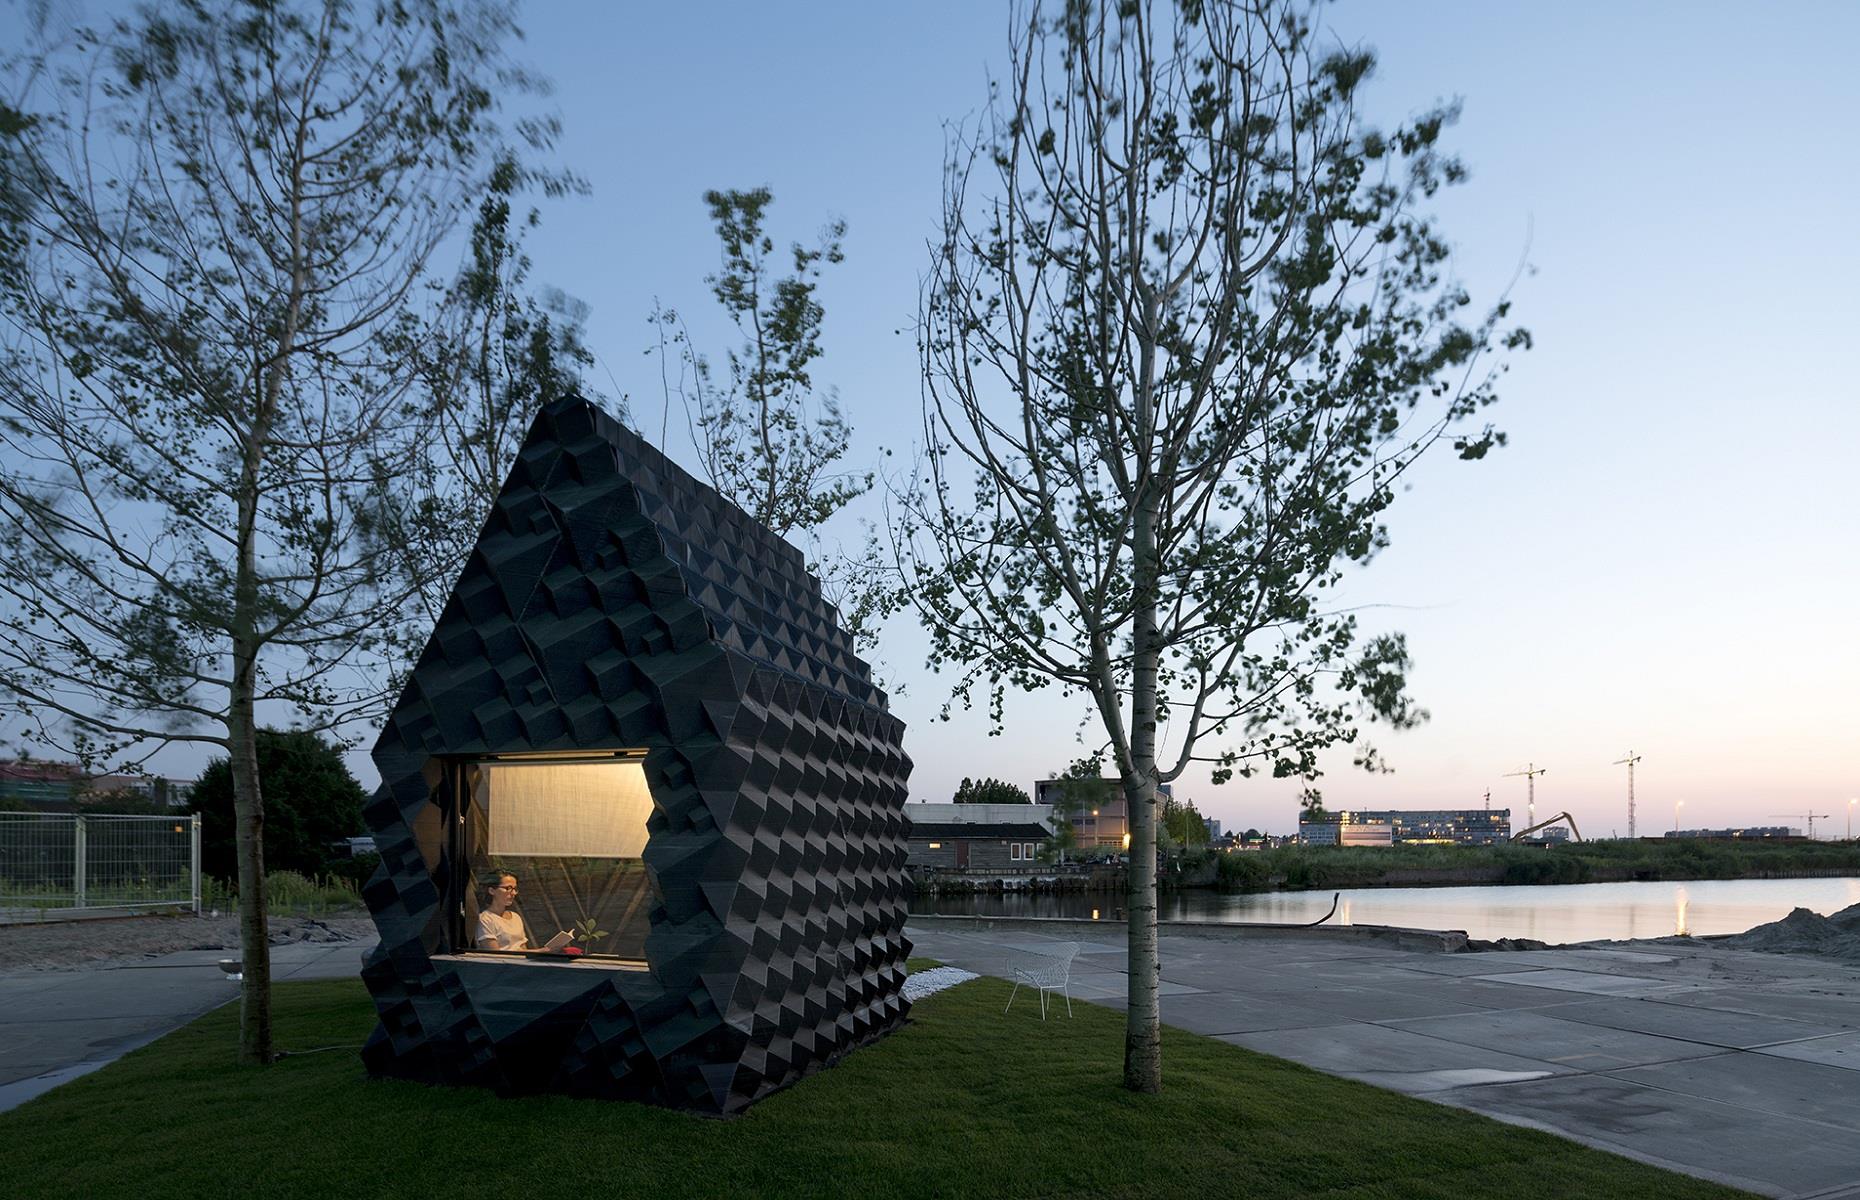 <p>If sustainability comes first in your home hunt then this pint-sized cabin might just tick all the right boxes. Perched on the waterfront in Amsterdam, the compact 3D-printed dwelling was dreamed up by DUS Architects and executed by Aectual, their 3D-printing platform. While it's a cozy fit, the use of innovative construction materials allows plenty of exciting design possibilities.</p>